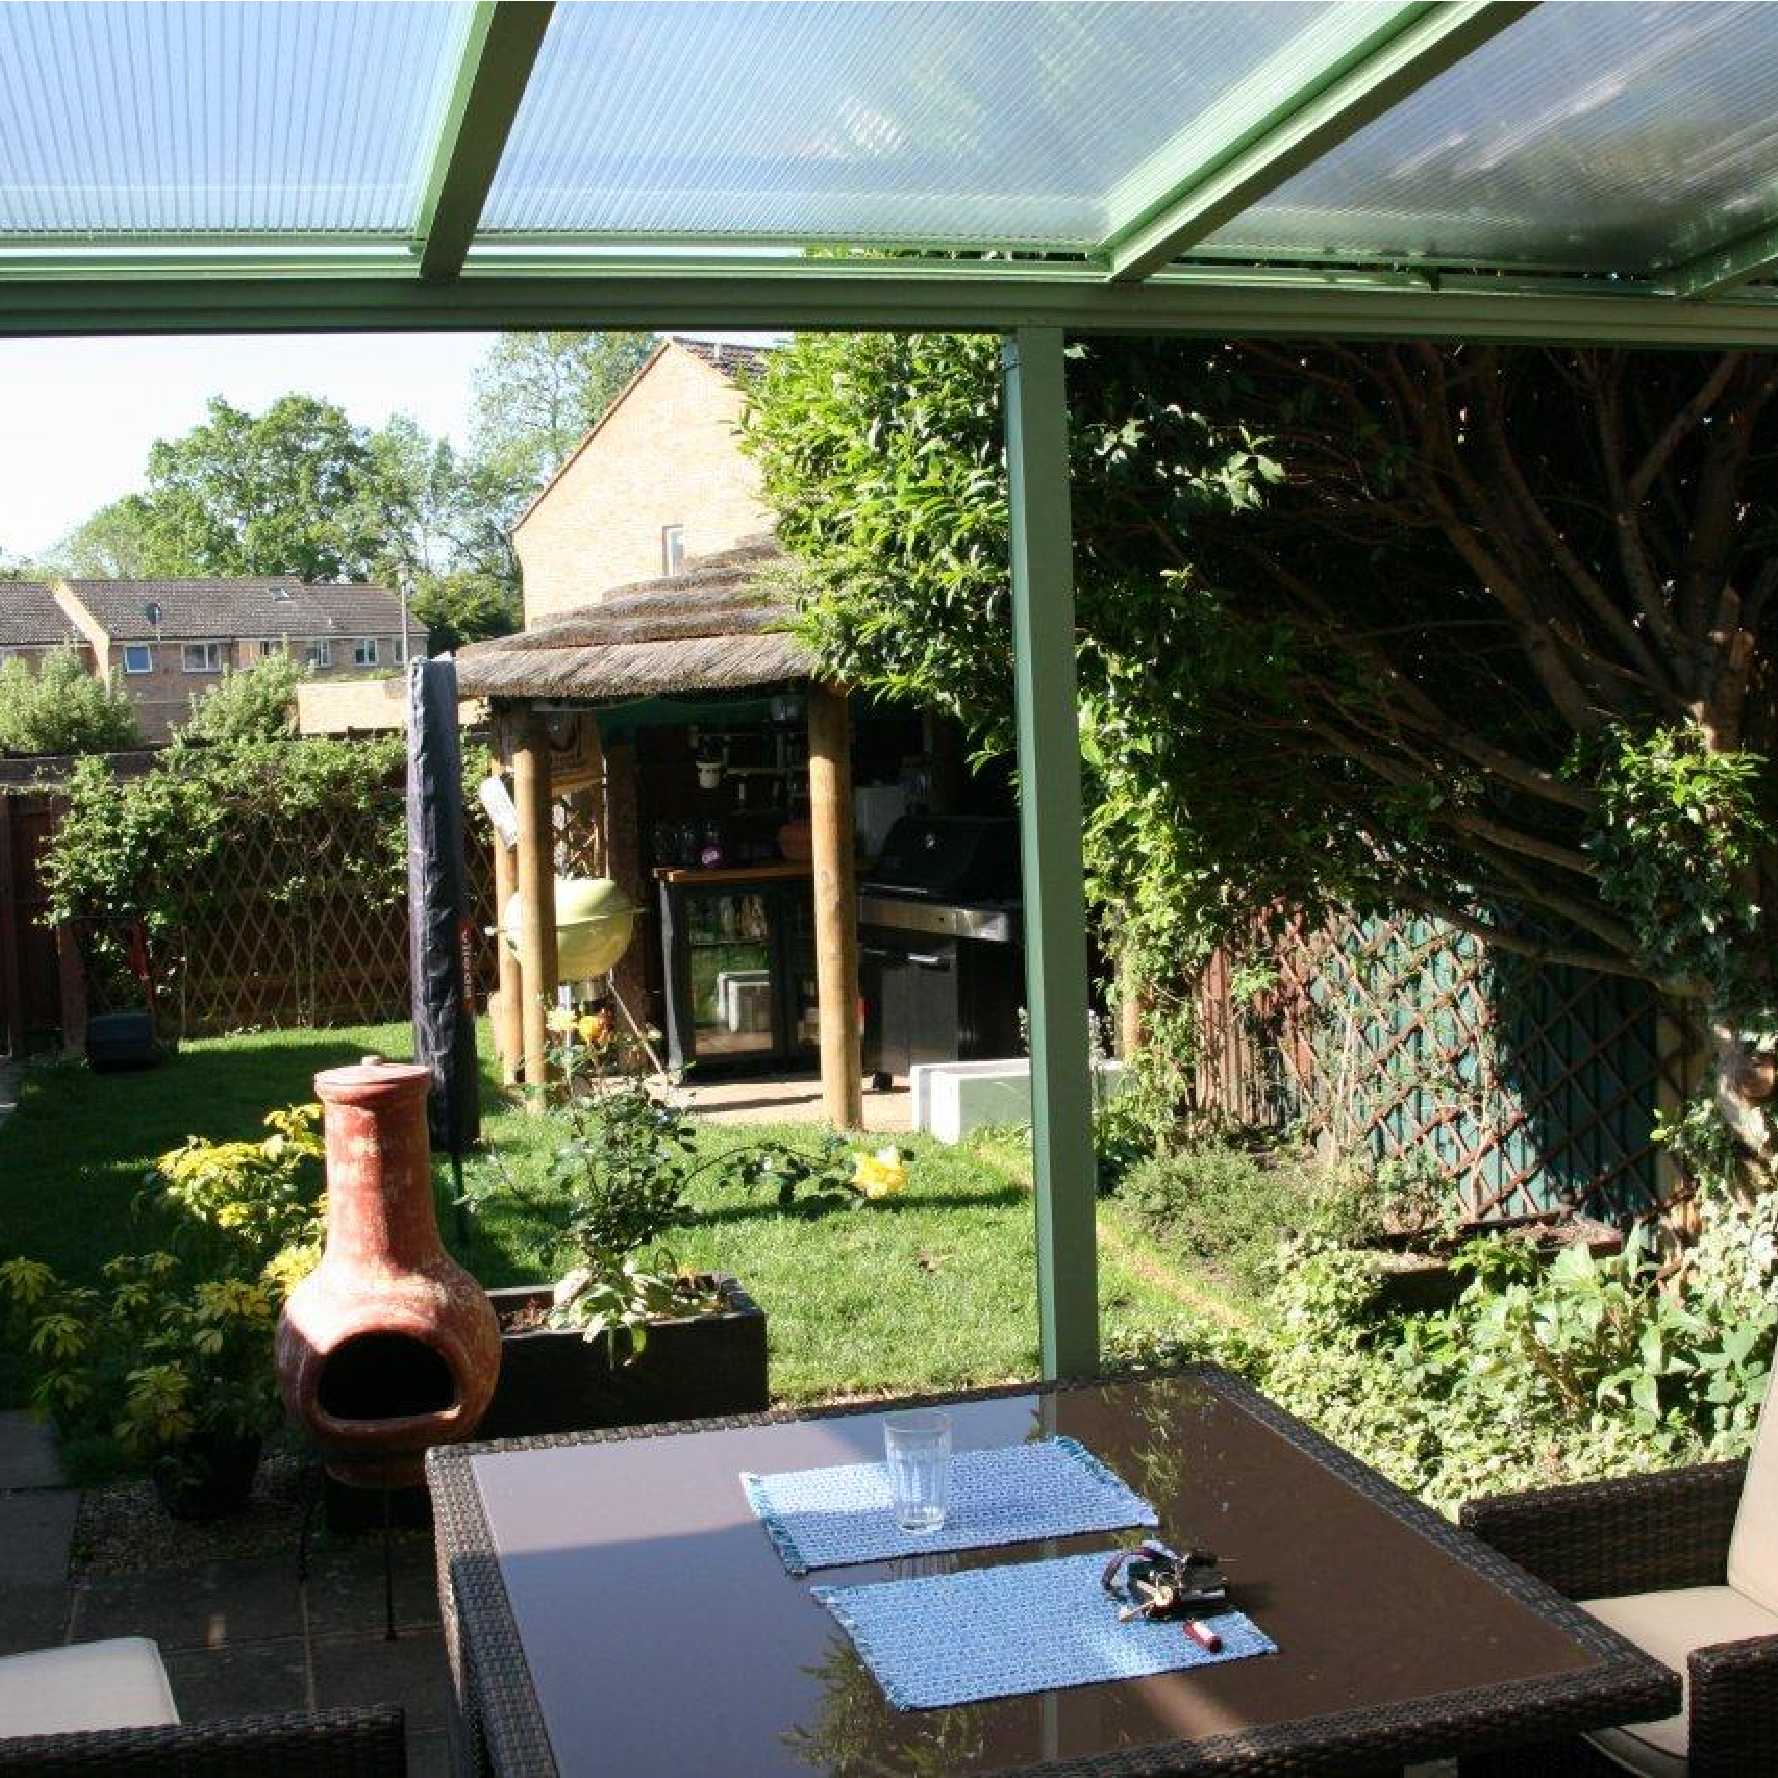 Affordable Omega Smart Lean-To Canopy, White with 16mm Polycarbonate Glazing - 10.6m (W) x 2.5m (P), (5) Supporting Posts